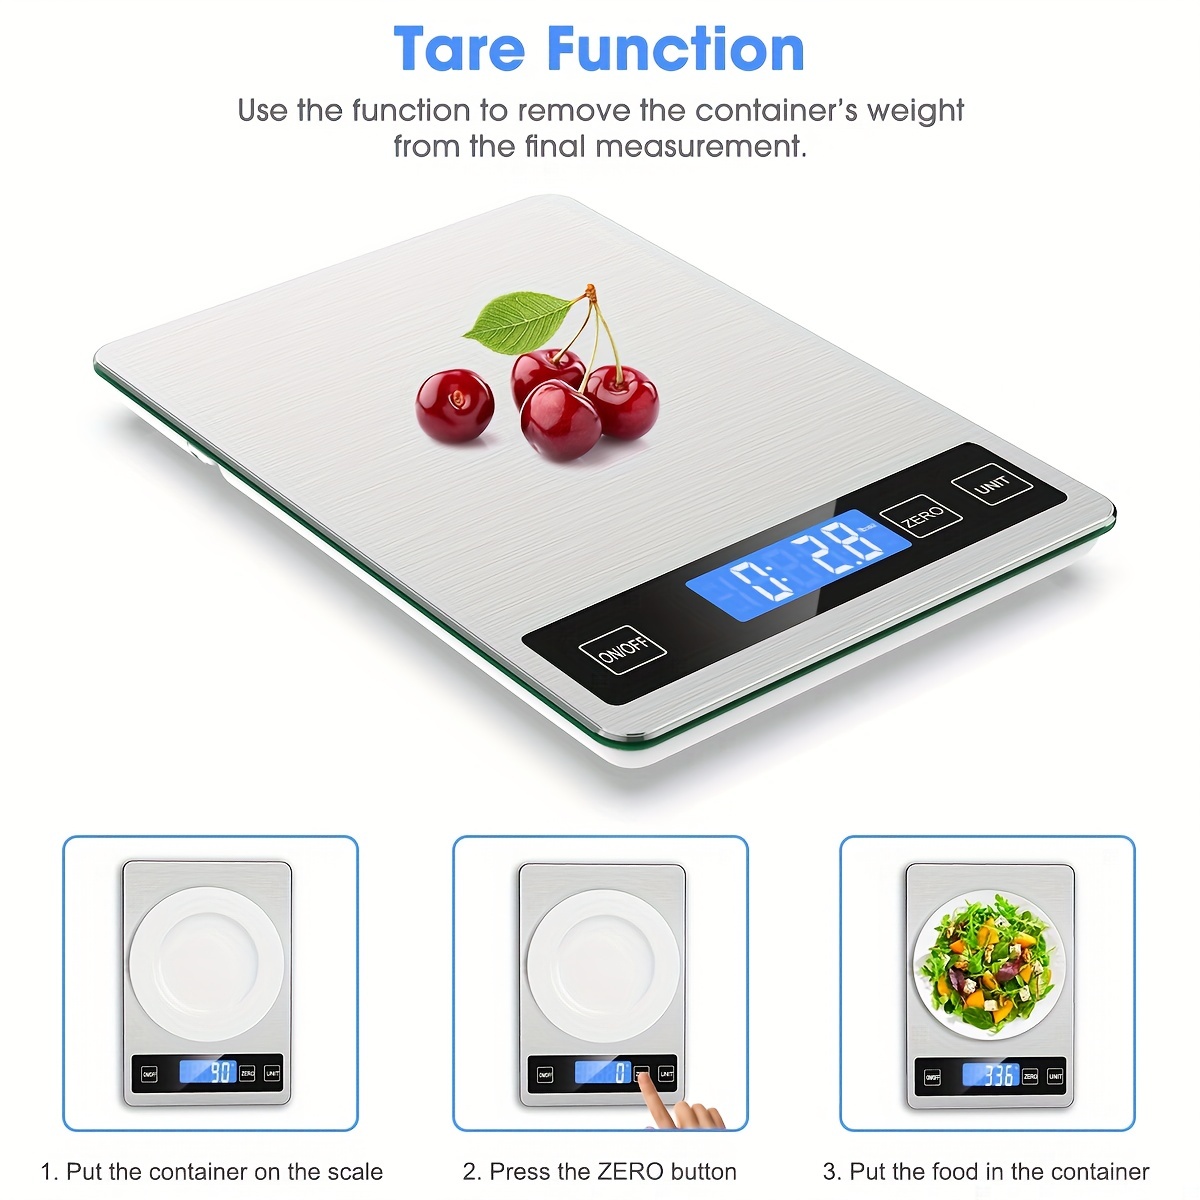 Nicewell Food Scale Digital Weight Grams and oz, 22lb Kitchen Scale for  Cooki